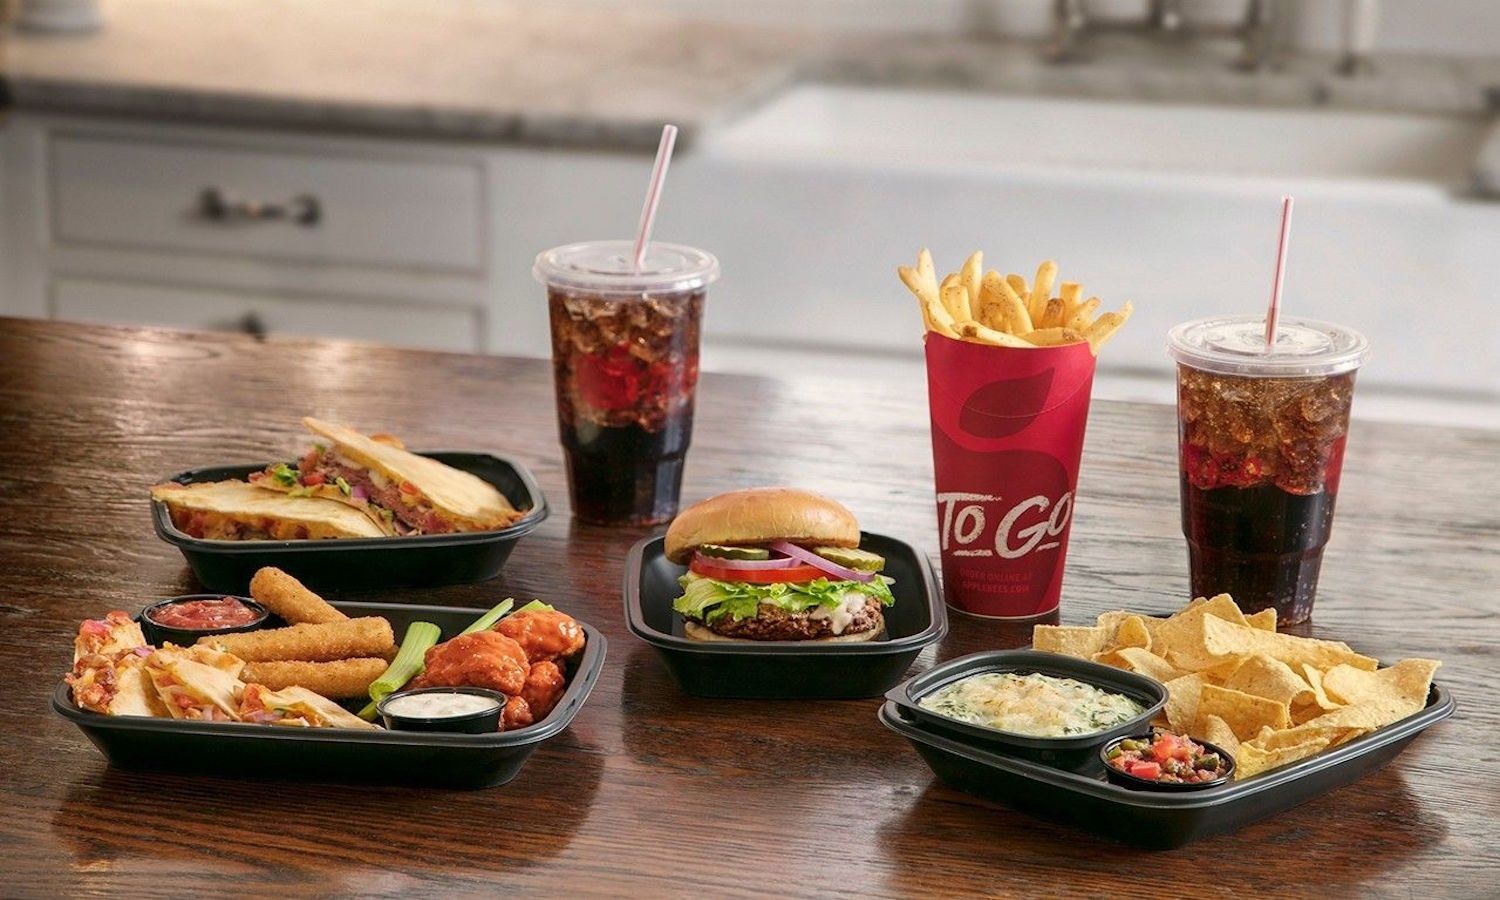 Applebee’s Takeout Near You in New Port Richey